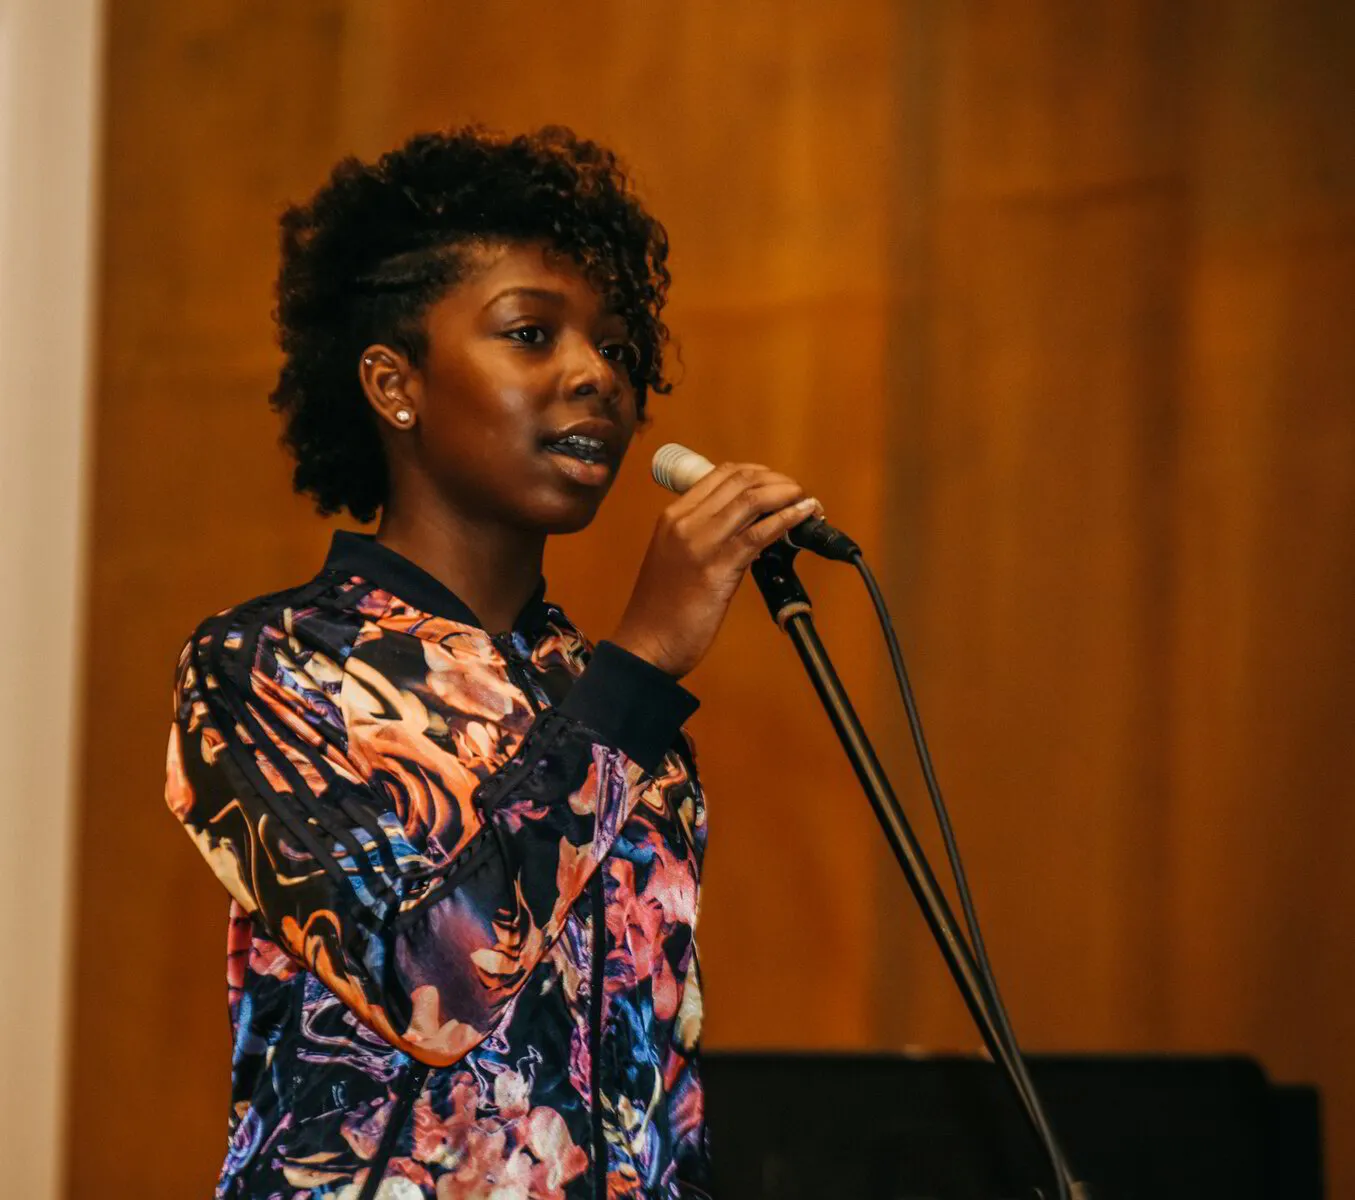 A NOLA School of Music student performing in our 2018 Student Concert.